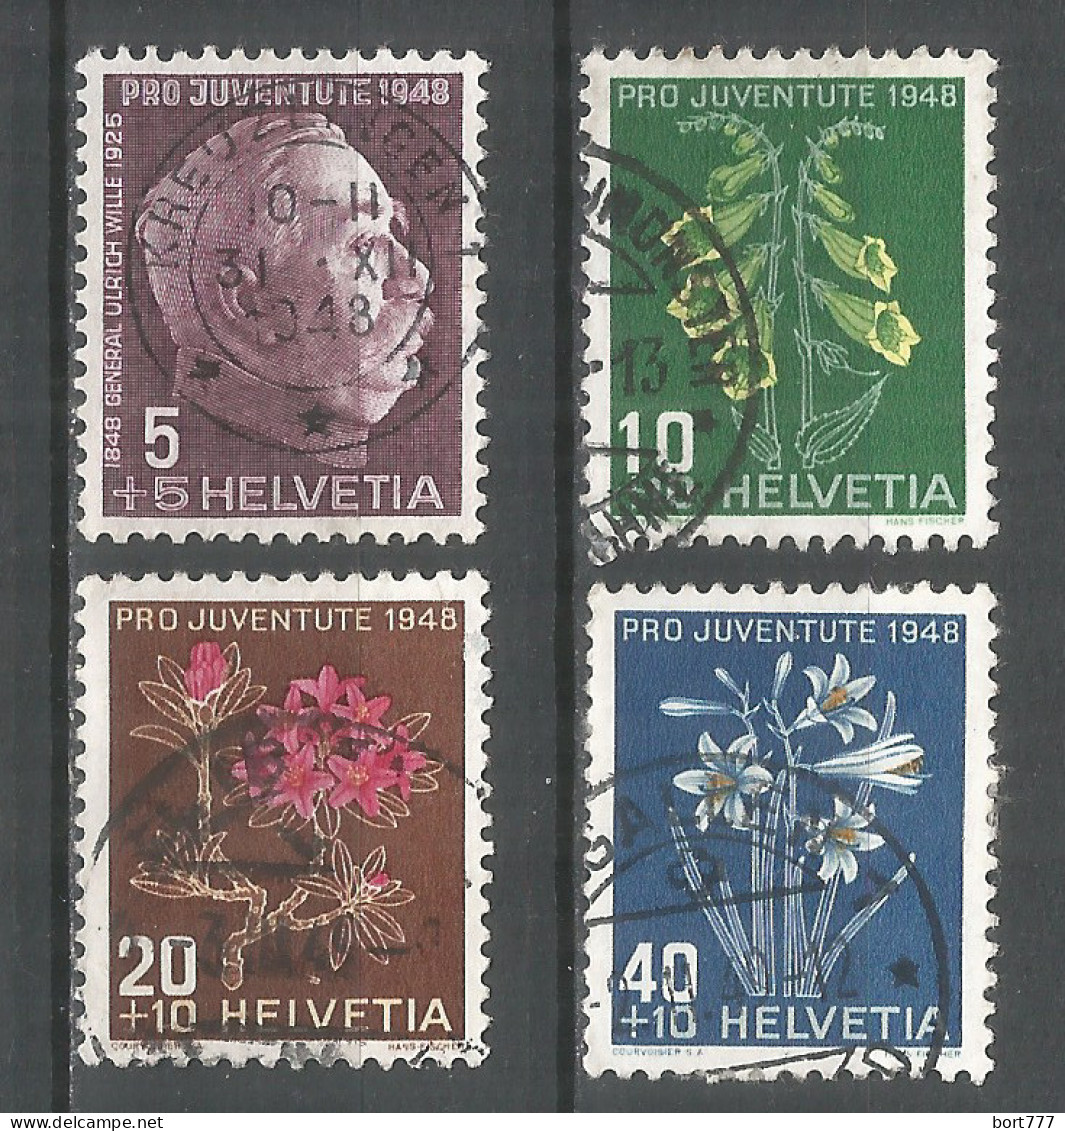 Switzerland 1948 Year , Used Stamps Mi # 514-517 - Used Stamps